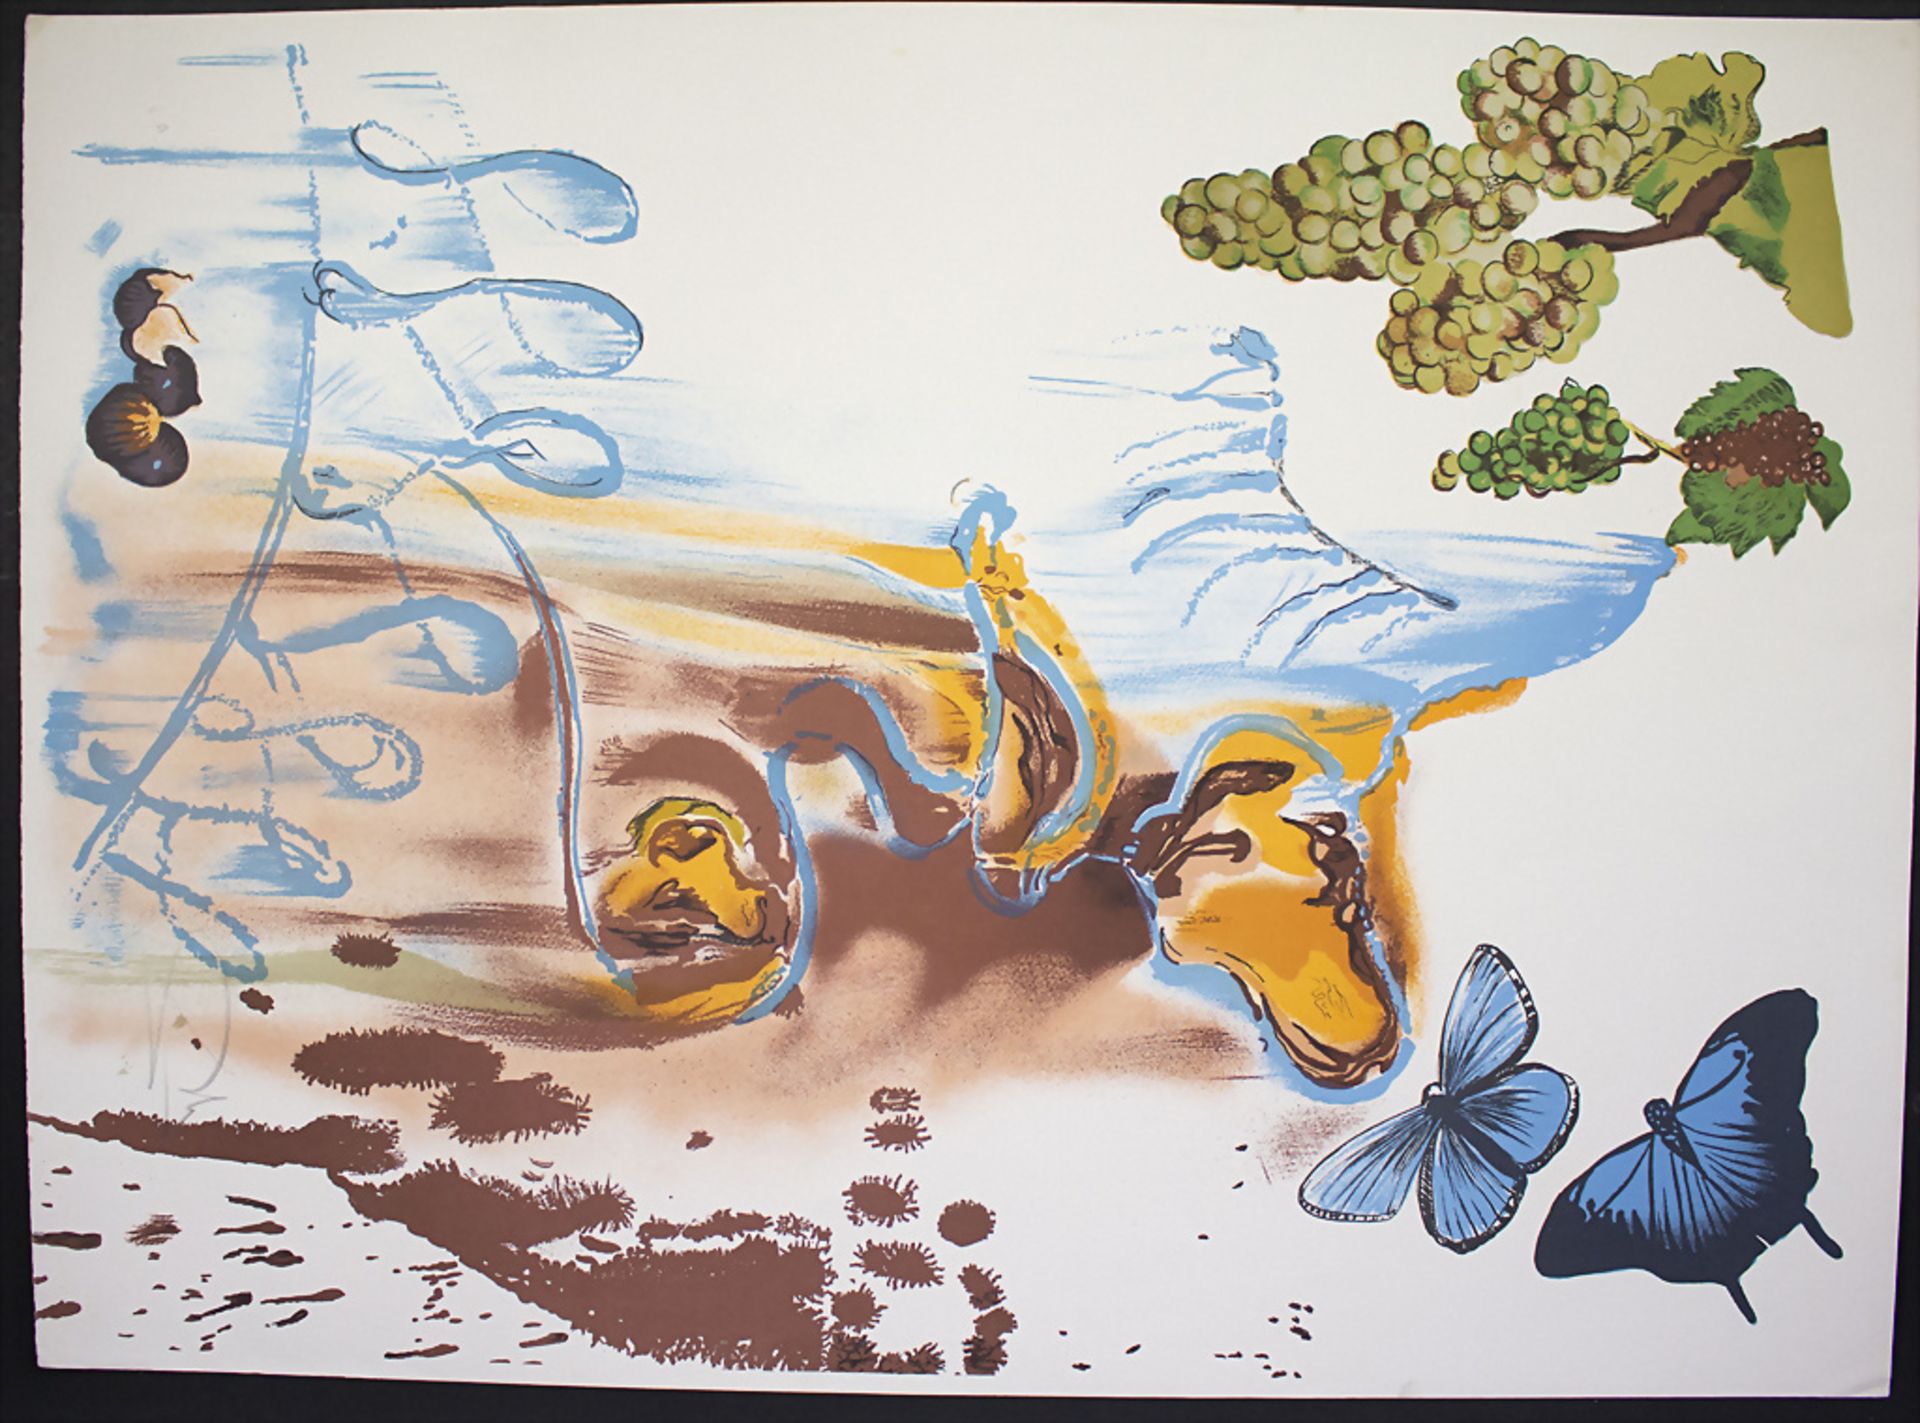 Salvador DALI (1904-1989), 'Four Seasons Suite - Summer' / 'Summer from the Seasons Suite, 1972